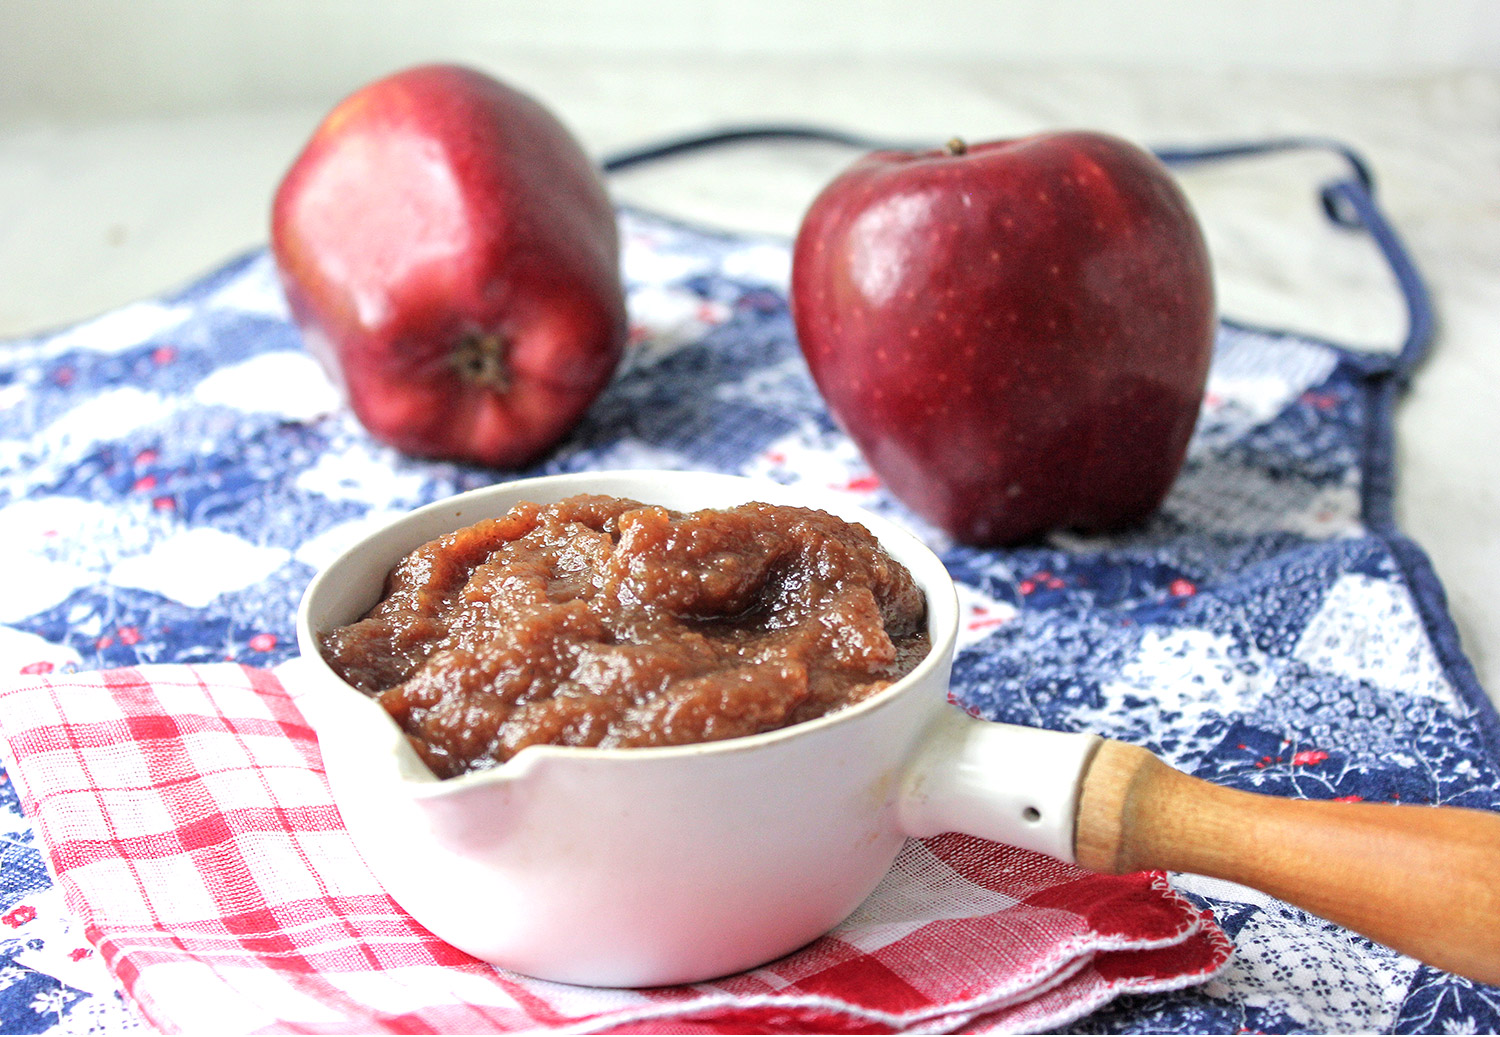 Apple butter in a small enamel pouring cup resting upon an apron with apples in the background.